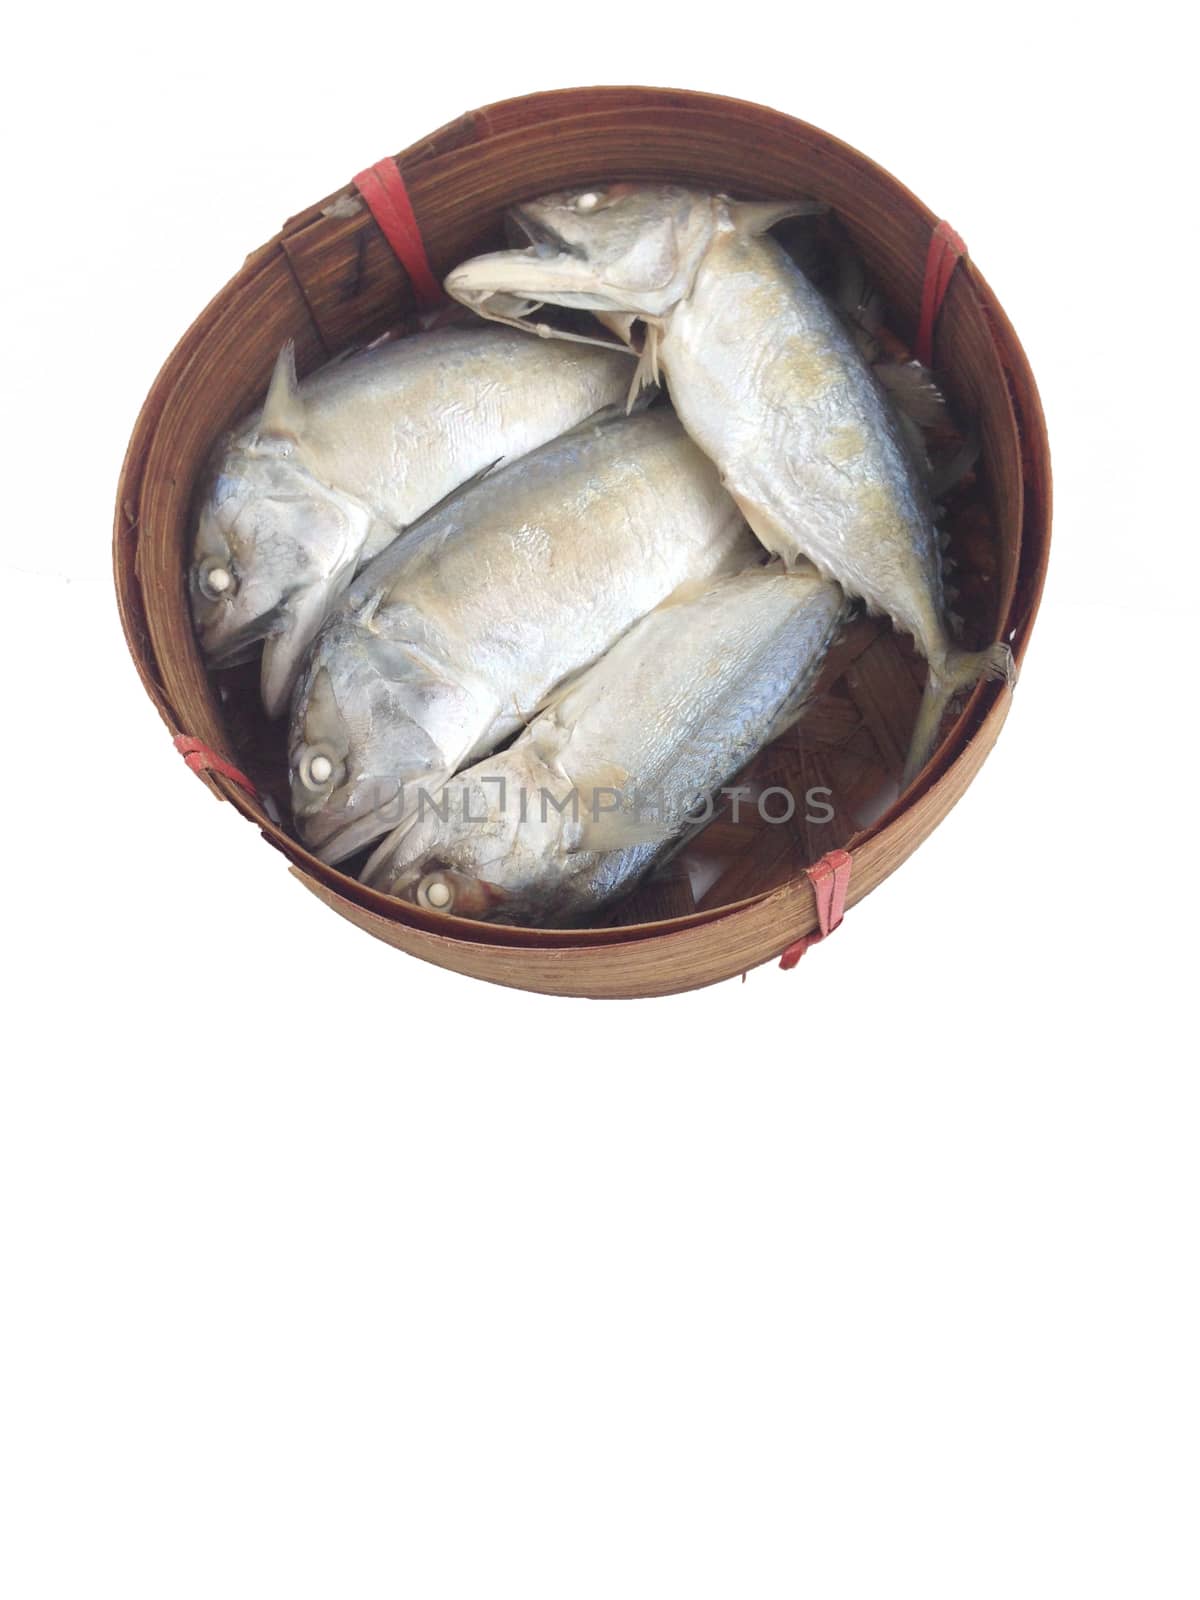 short mackerel on a round crate made of bamboo, used to transport fruits or fish on white background